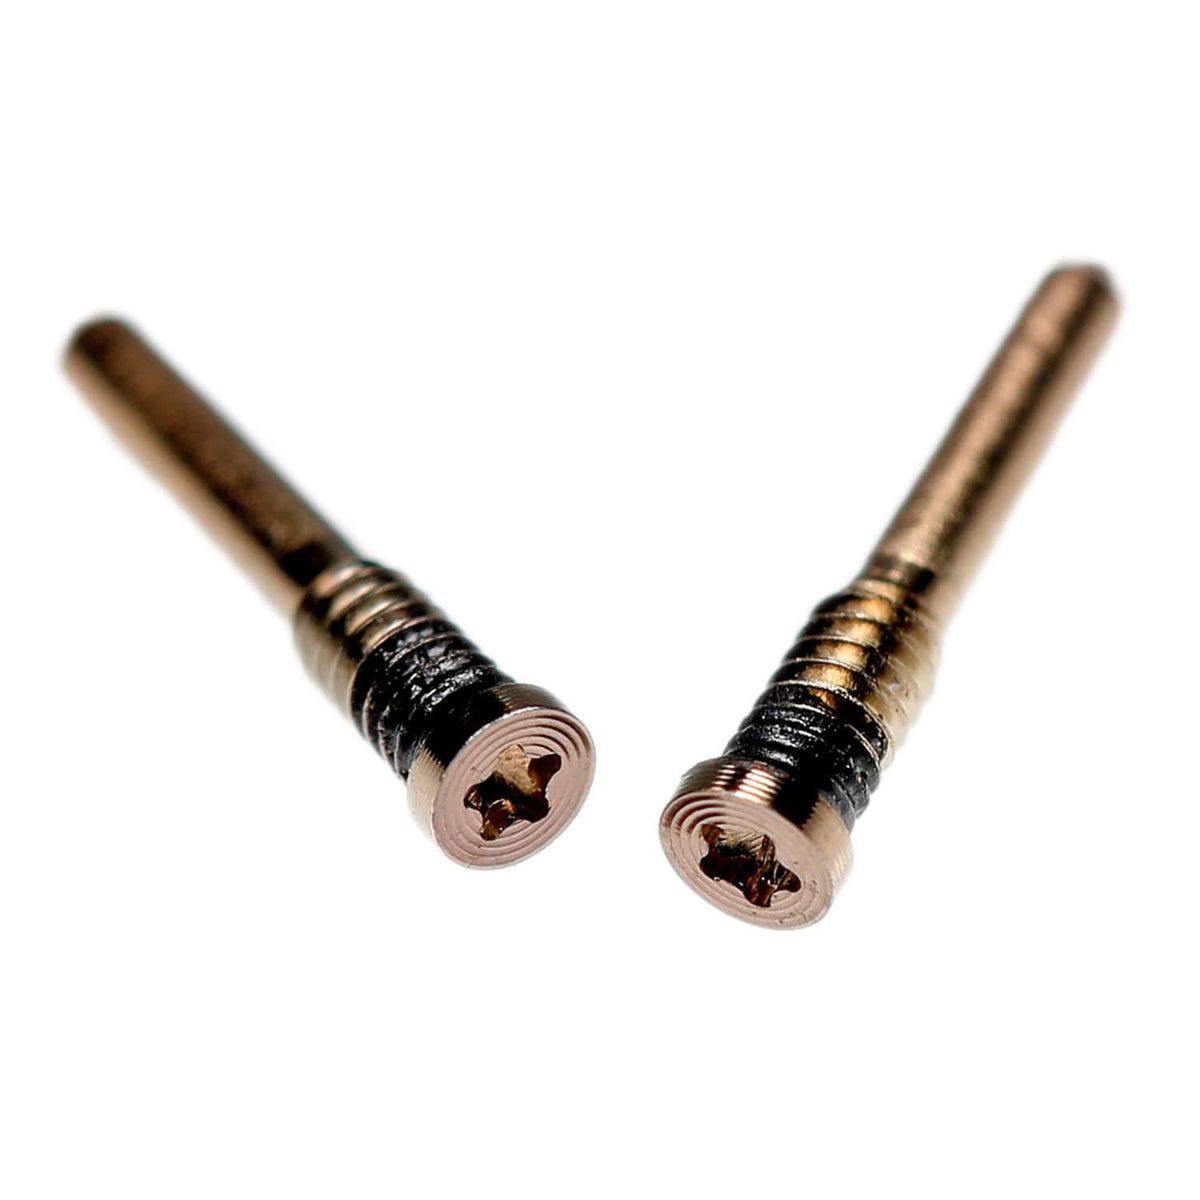 Replacement for iPhone 11-14 Pro Max Bottom Screw 2pcs/set - Gold